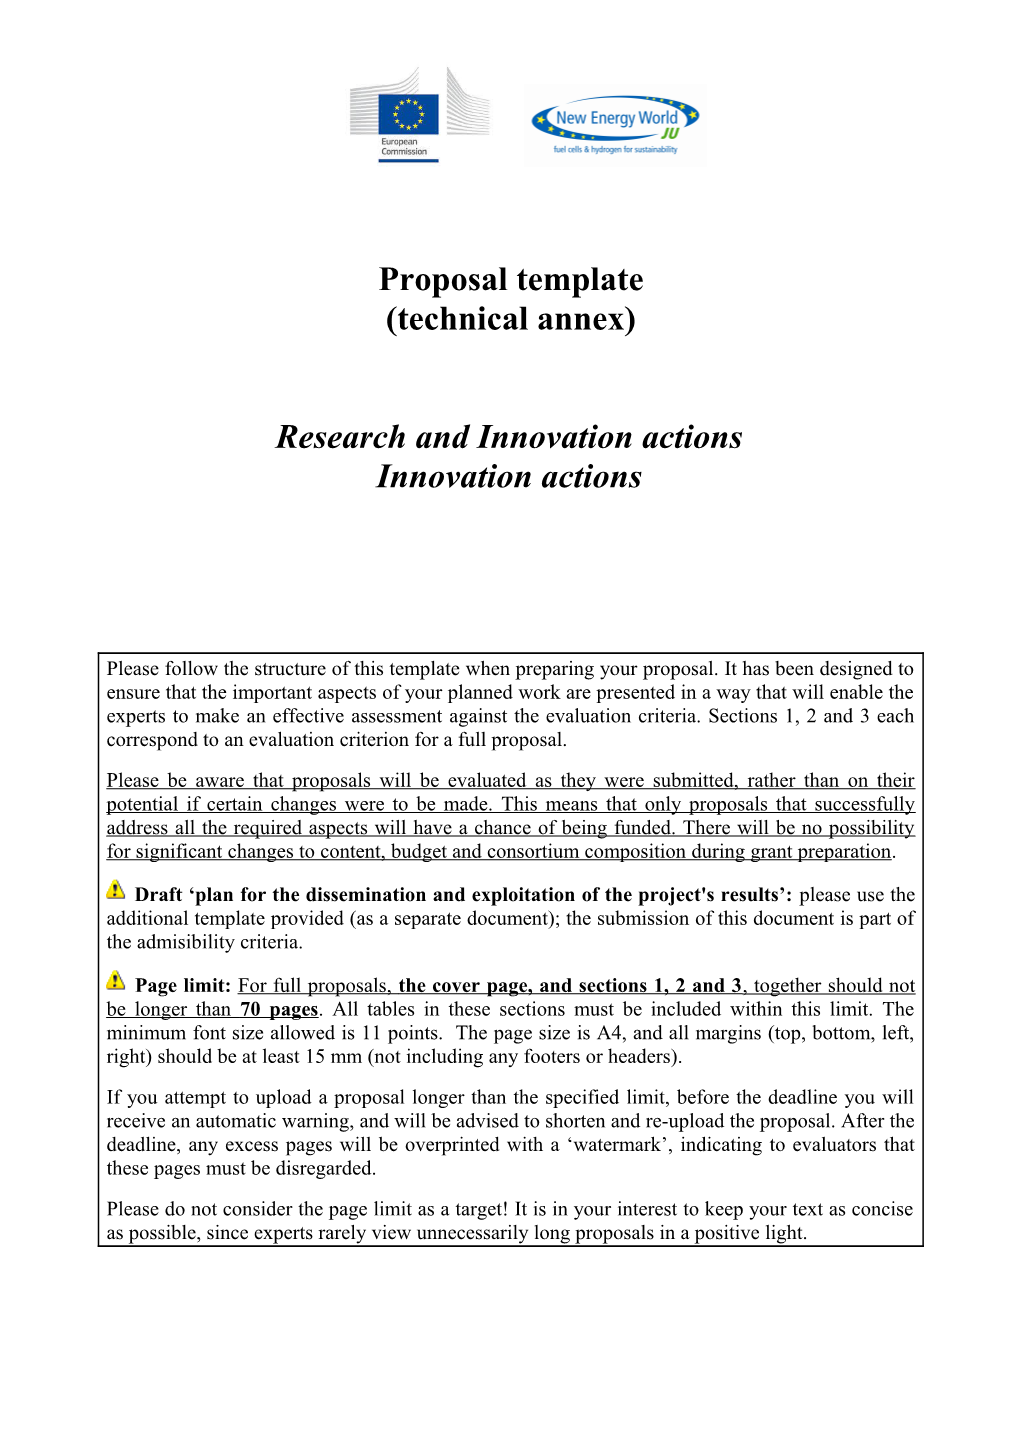 Research and Innovation Actions